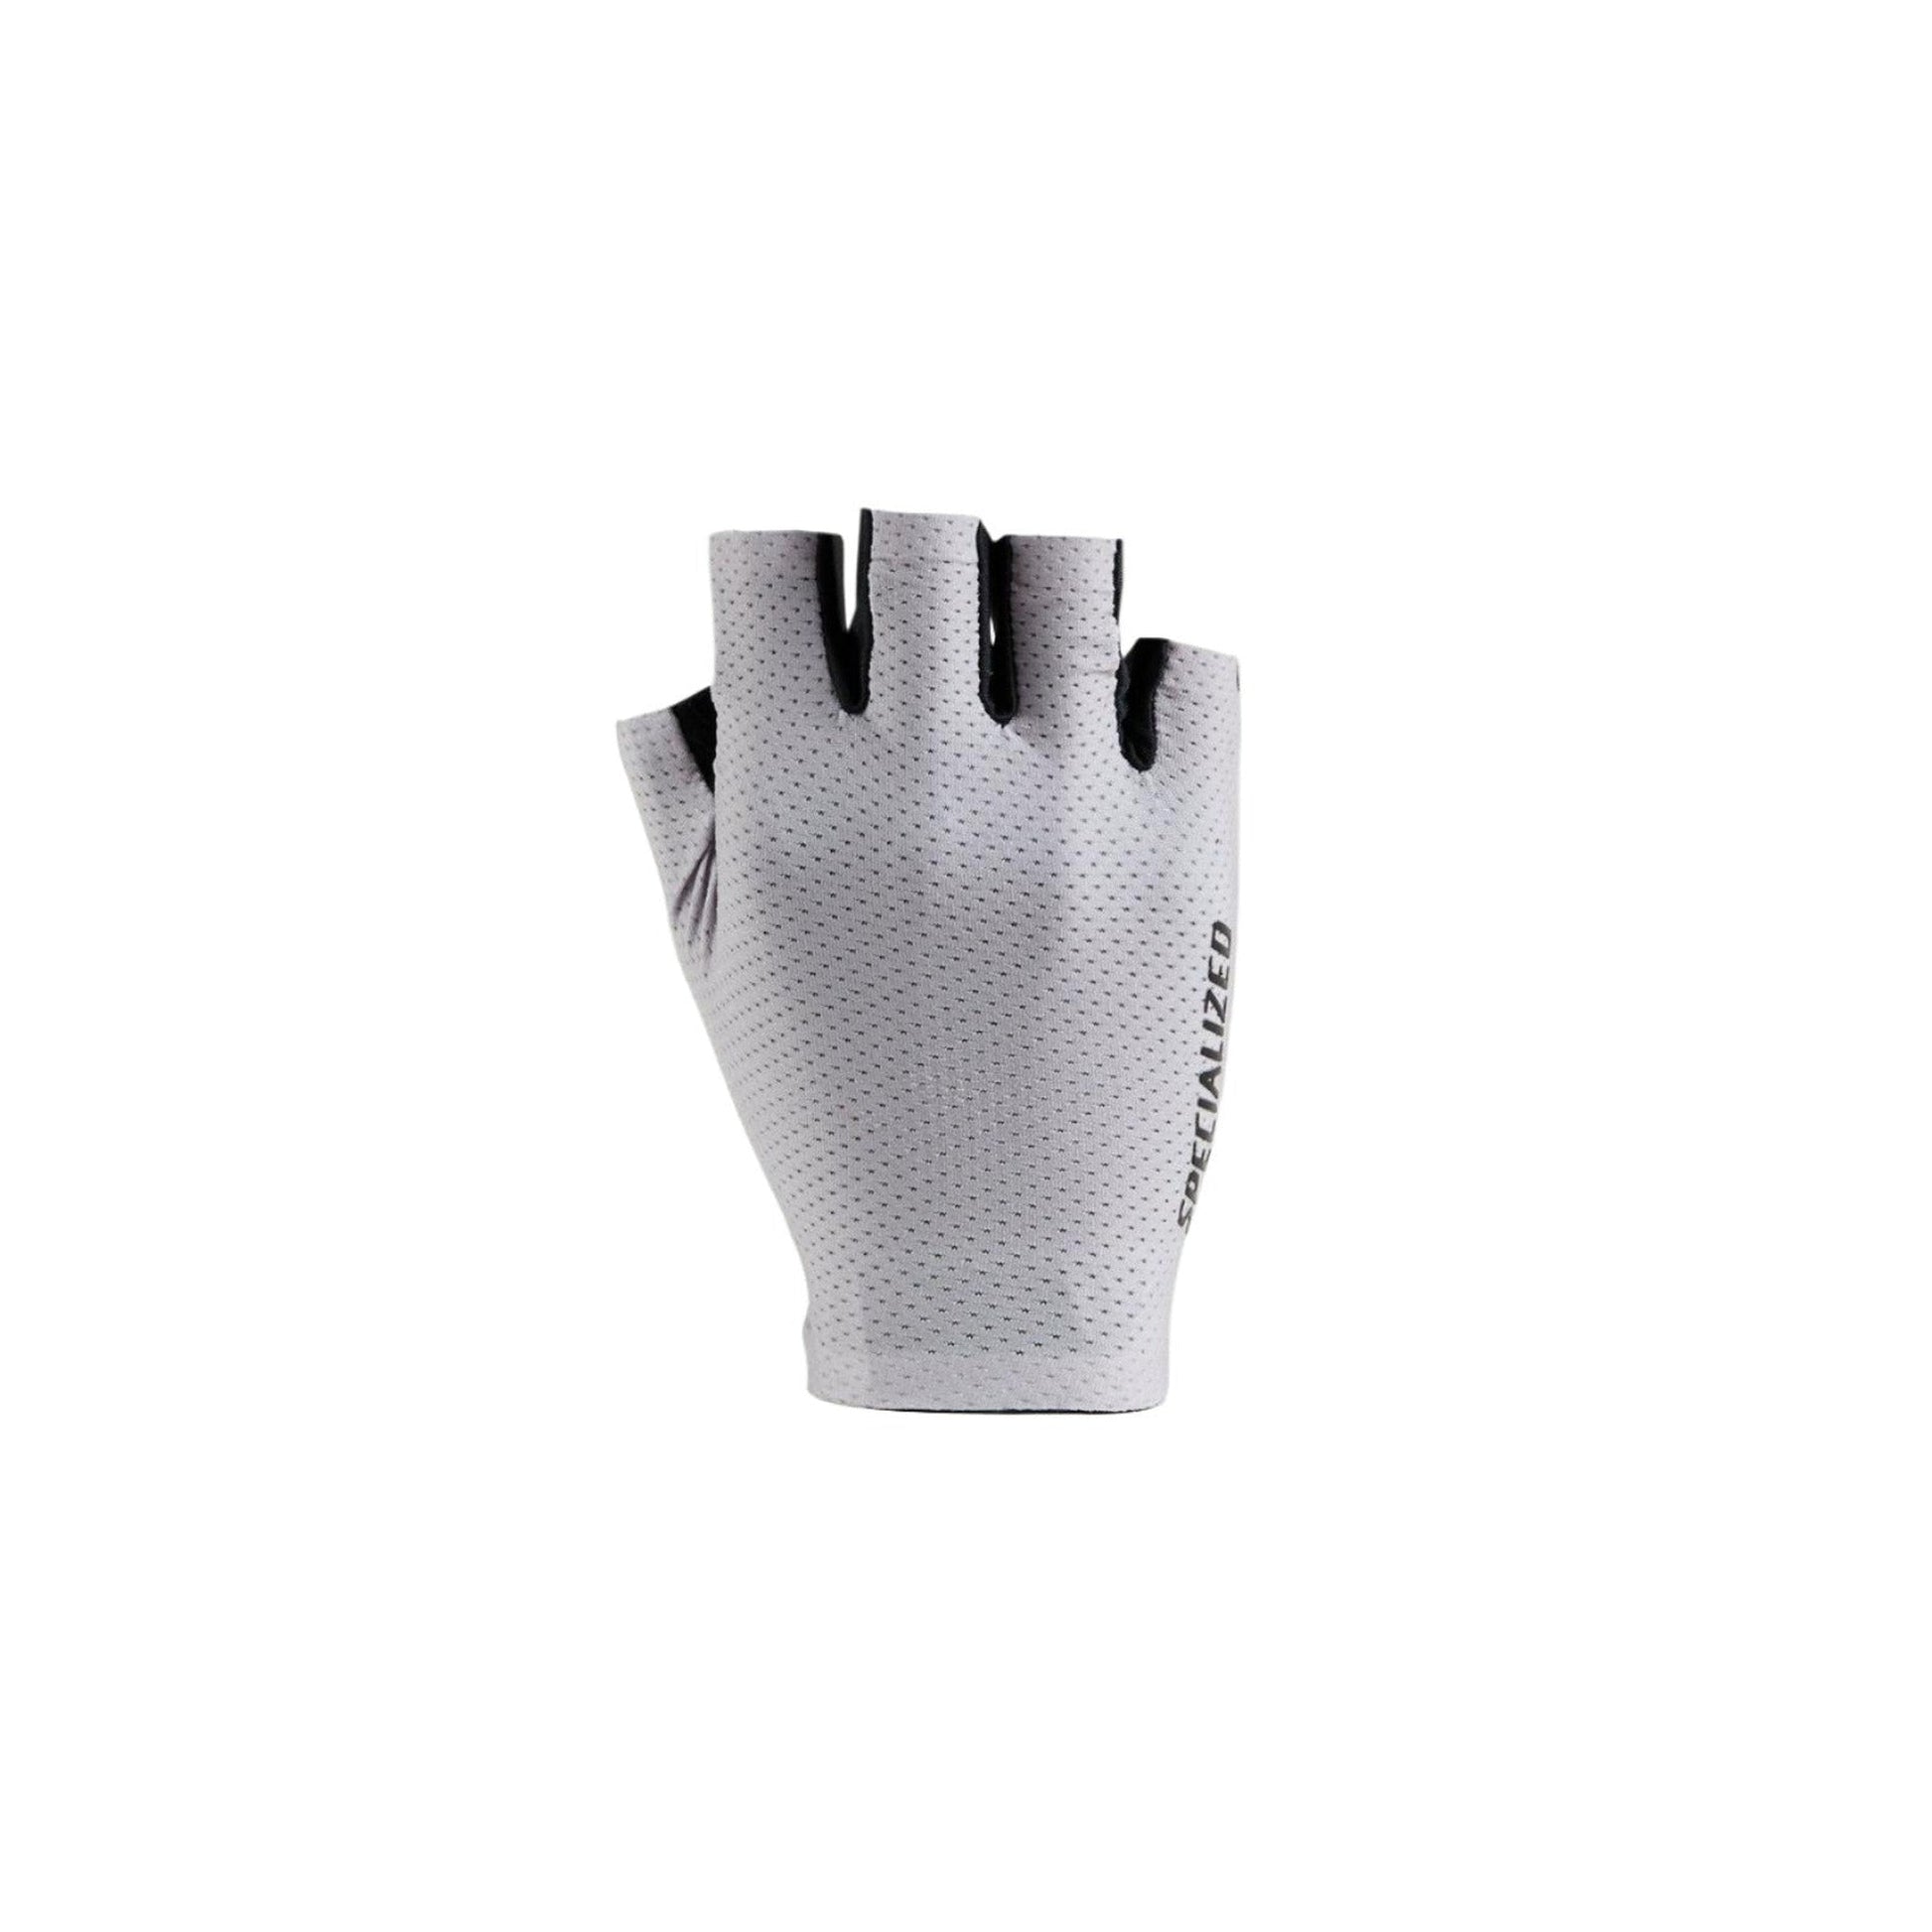 Men's SL Pro Short Finger Gloves | Complete Cyclist - To complement their superb fit and breathability, our SL Pro gloves feature our LifeLineª palm construction for optimal hand-to-bar contact, and this delivers